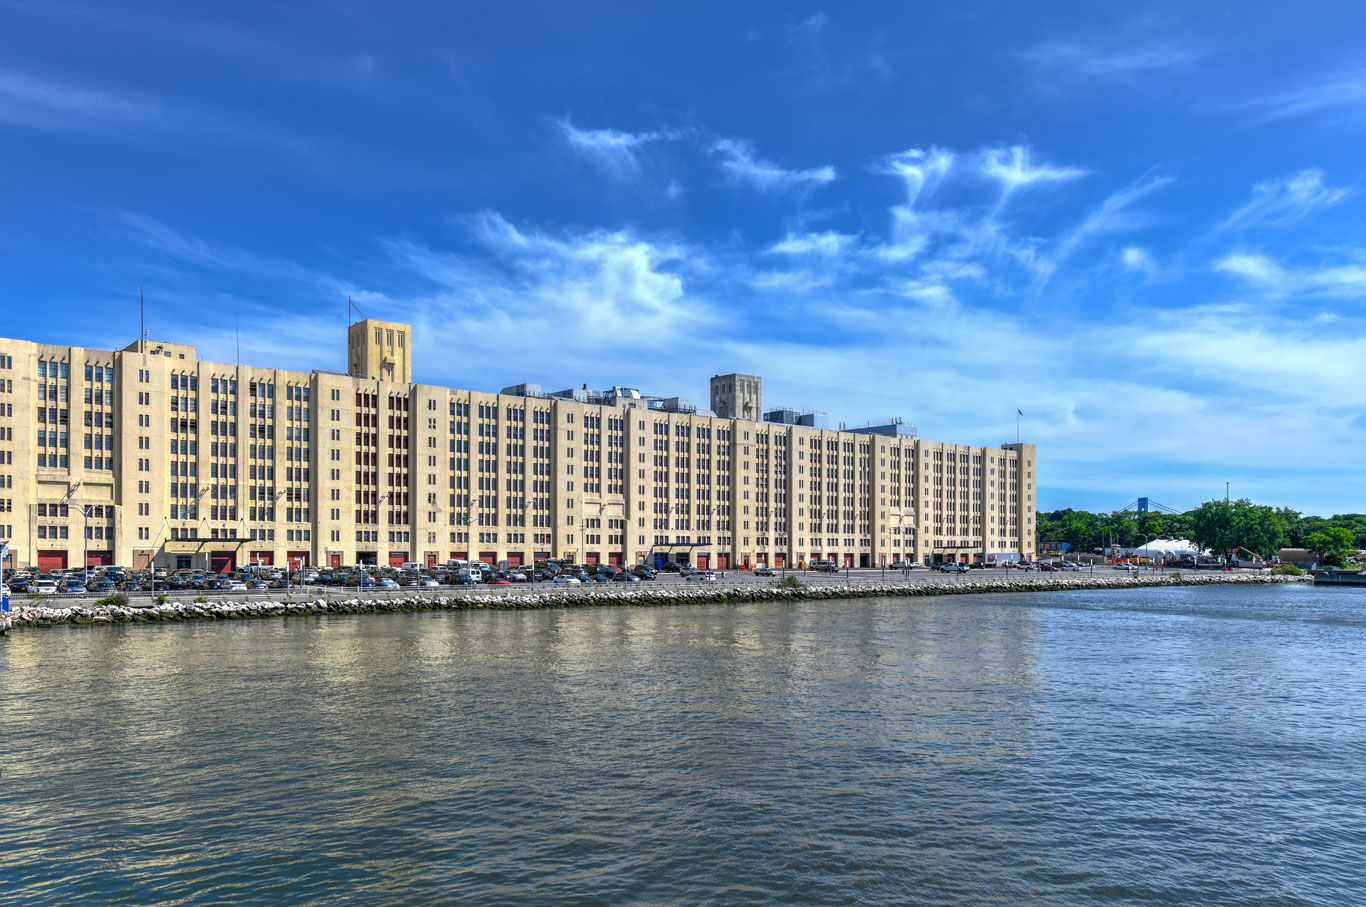 Outside of the Brooklyn Army Terminal